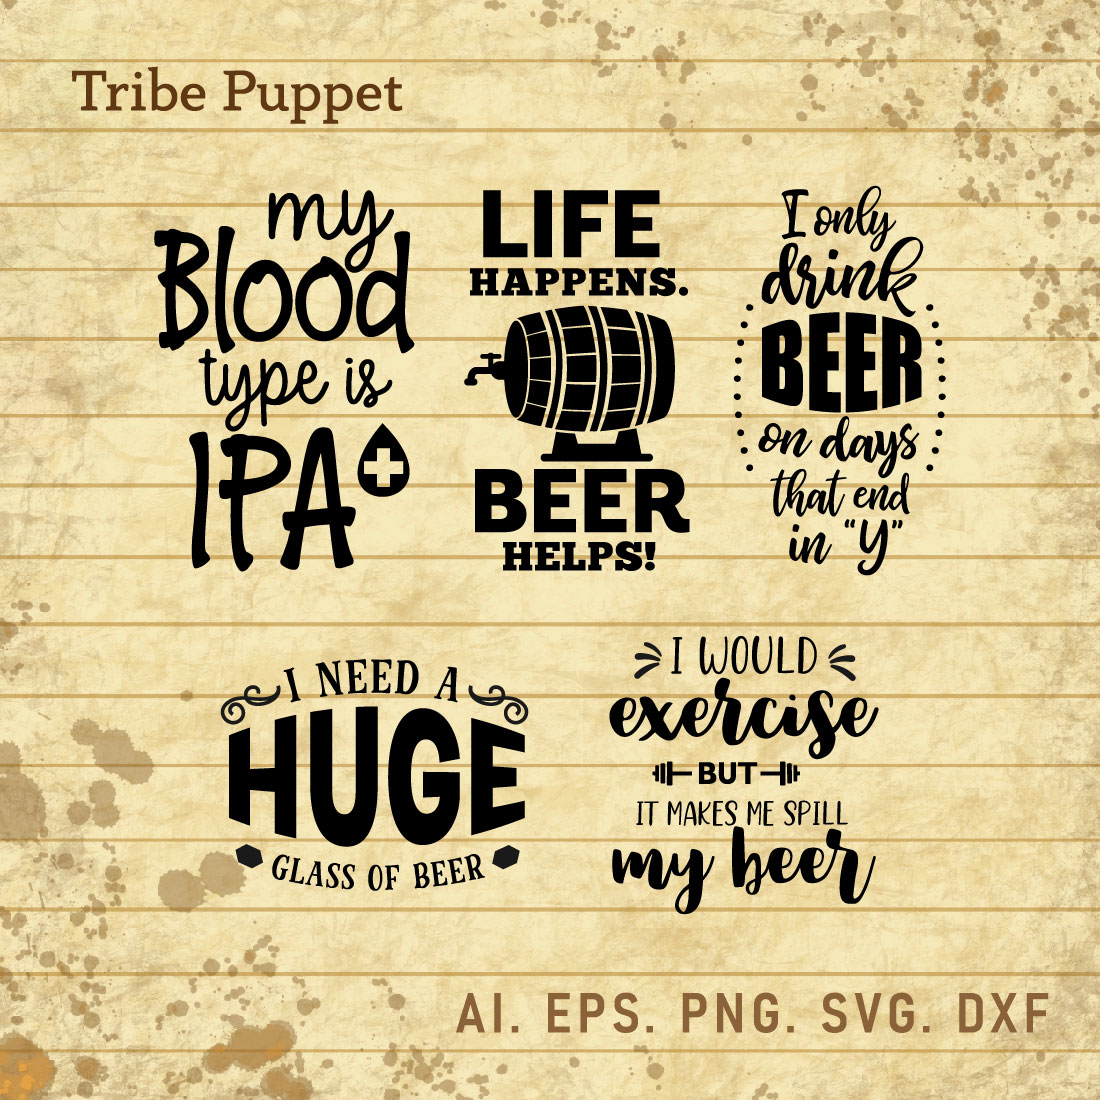 Beer quotes cover image.